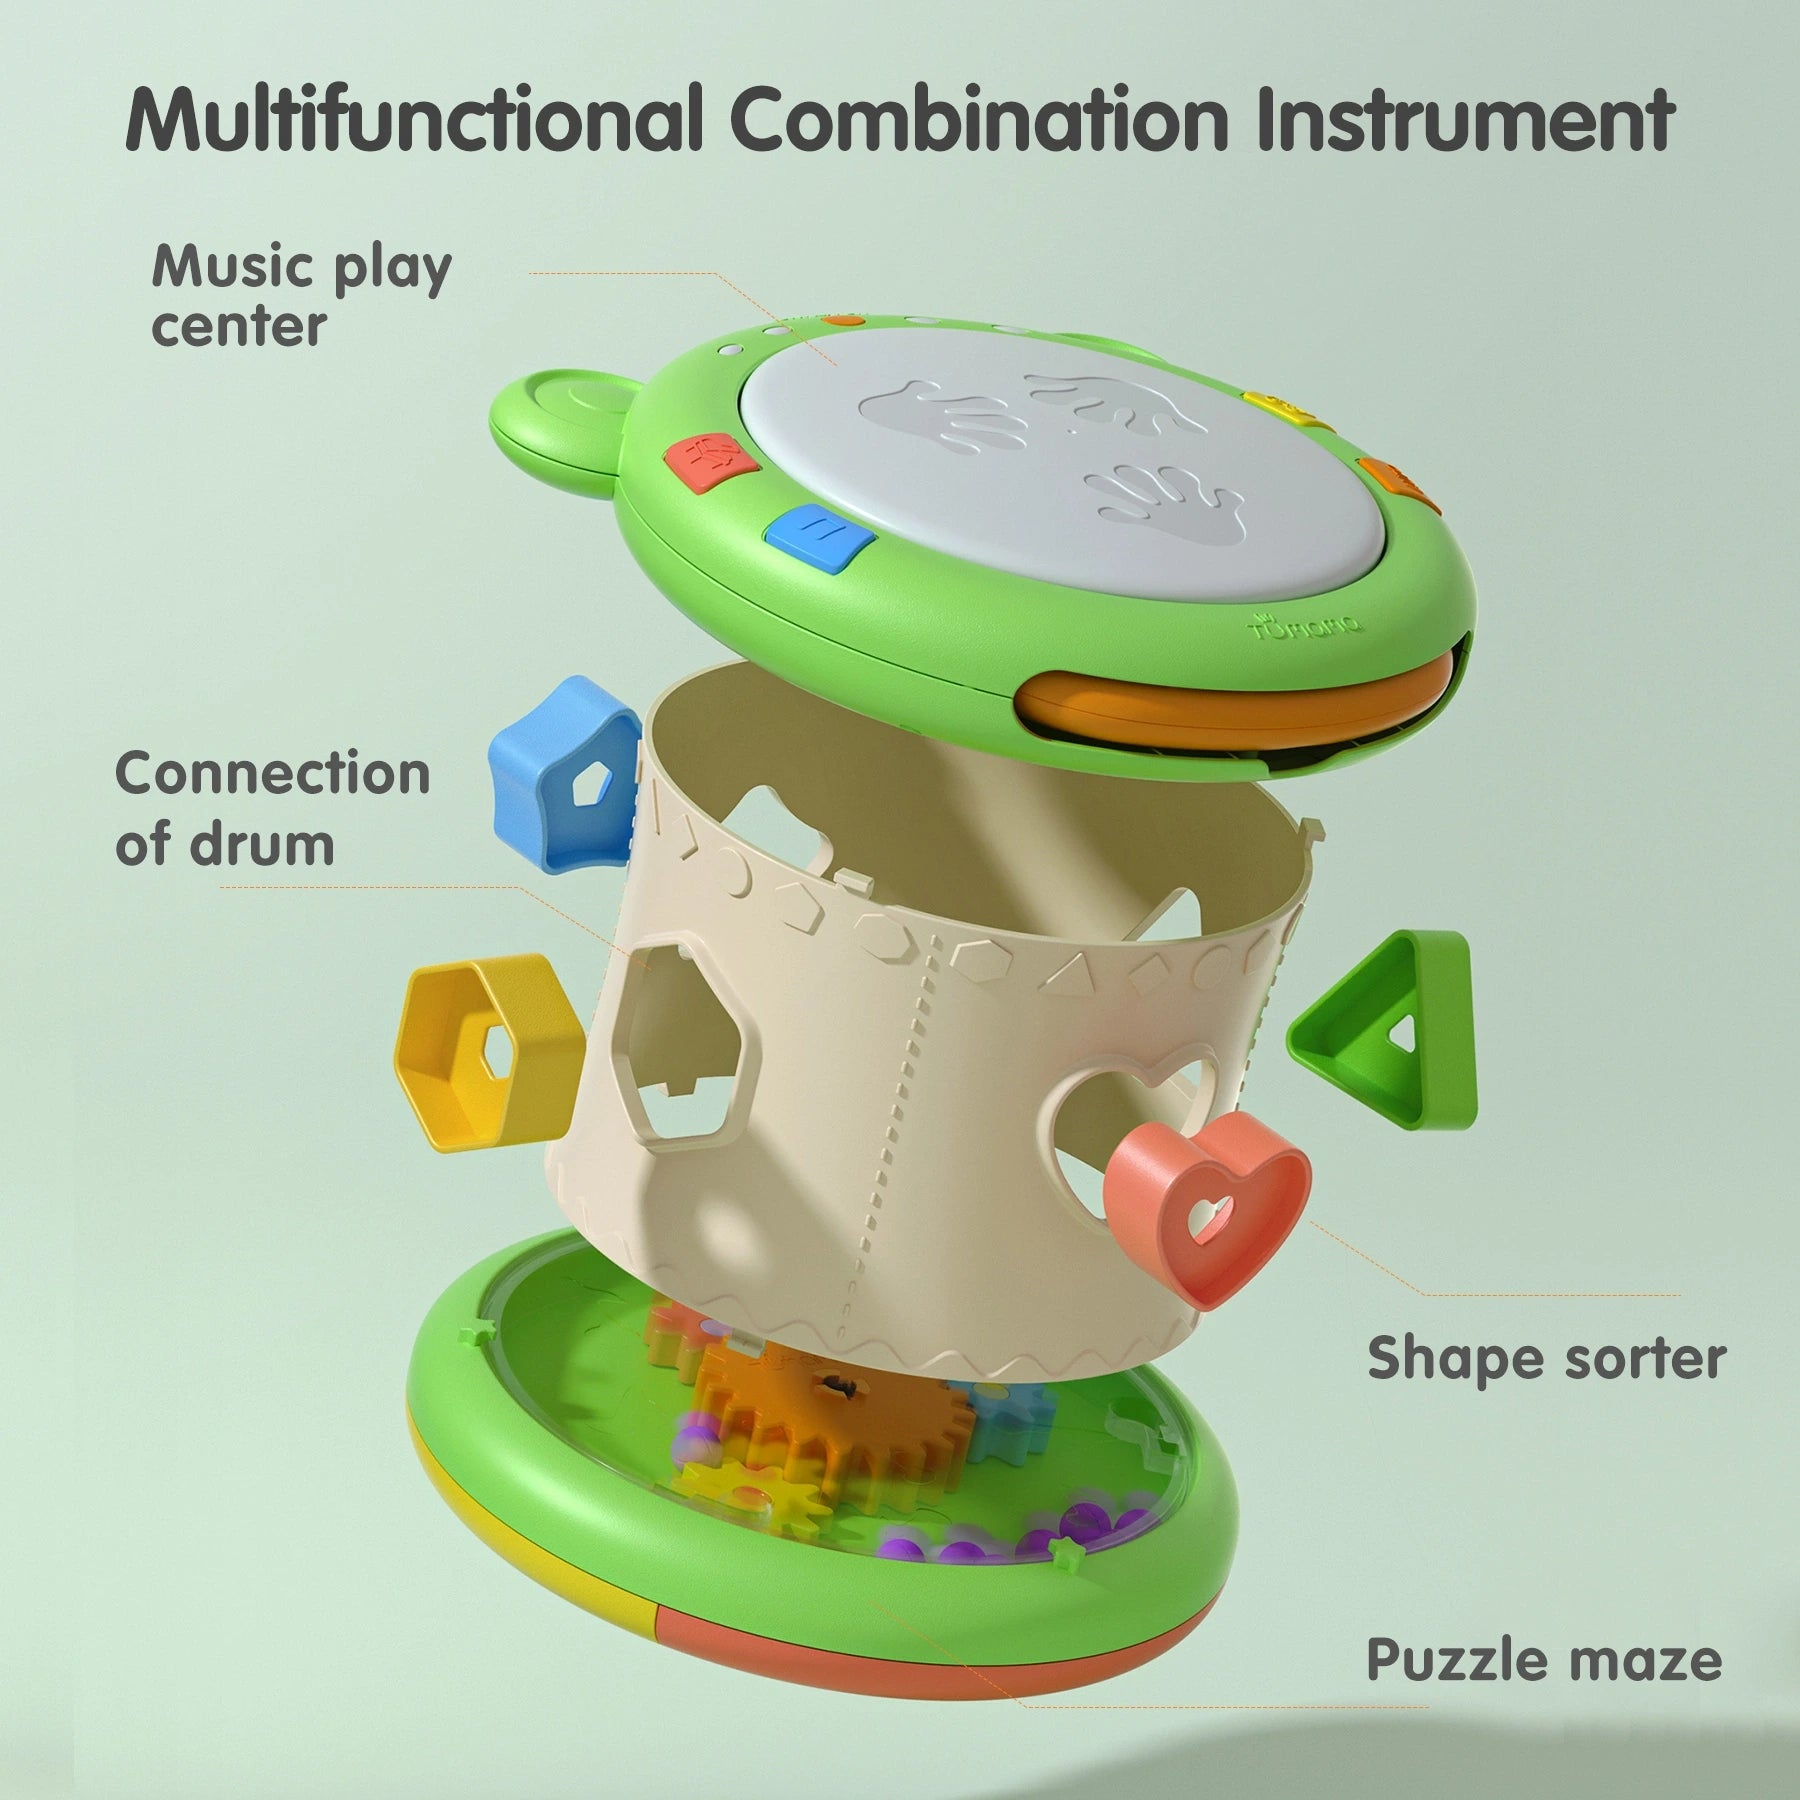 Baby musical toy,3-in-1 musical instruments sensory toy with light and sounds  shape sorter activity music cube for baby toddler 18 Months+